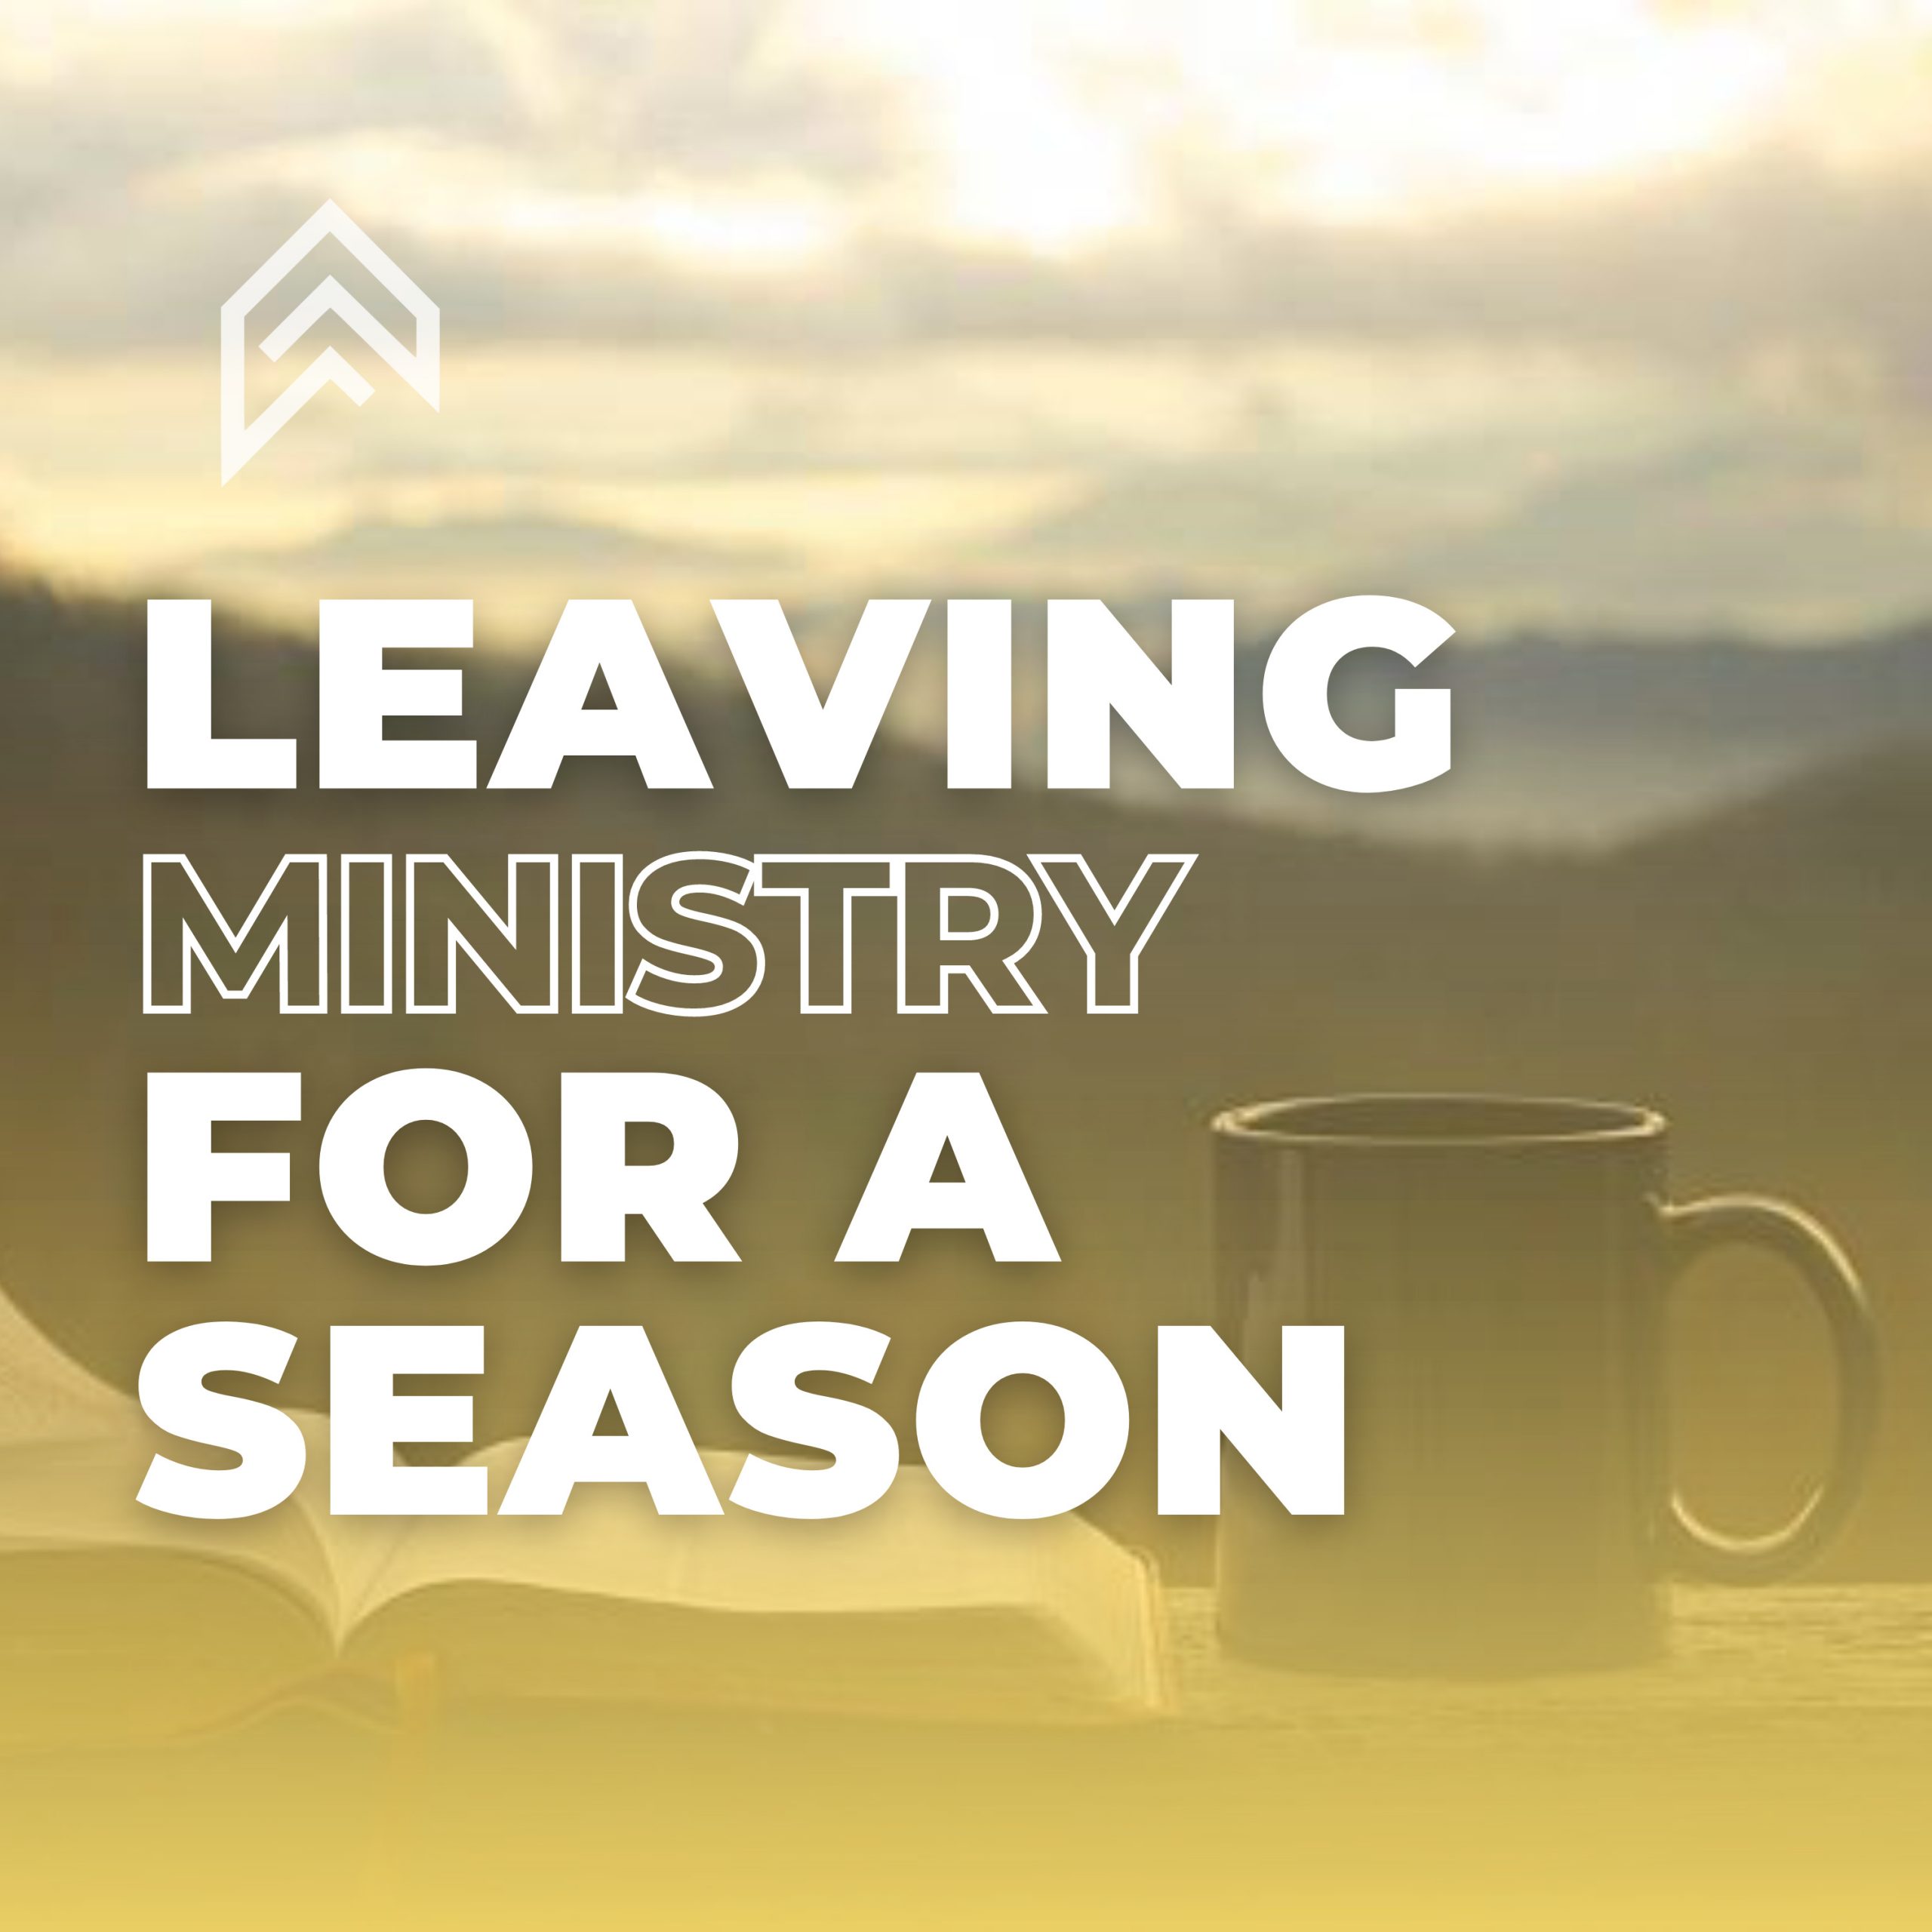 Should You Leave the Ministry for a Season?